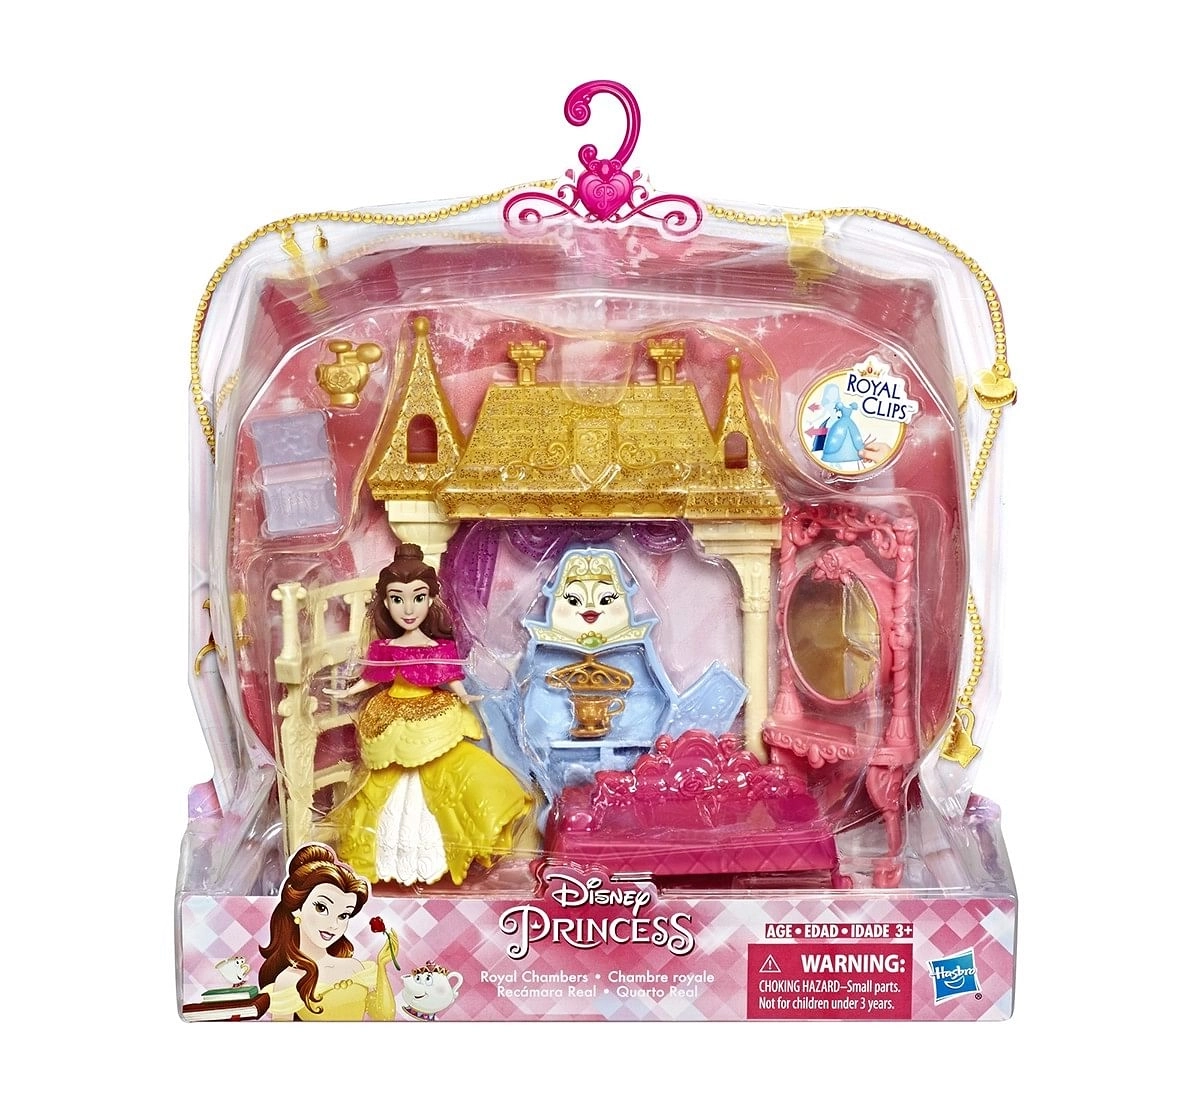 Disney Princess Royal Chambers Playset And Belle Doll & Accessories for age 3Y+ 